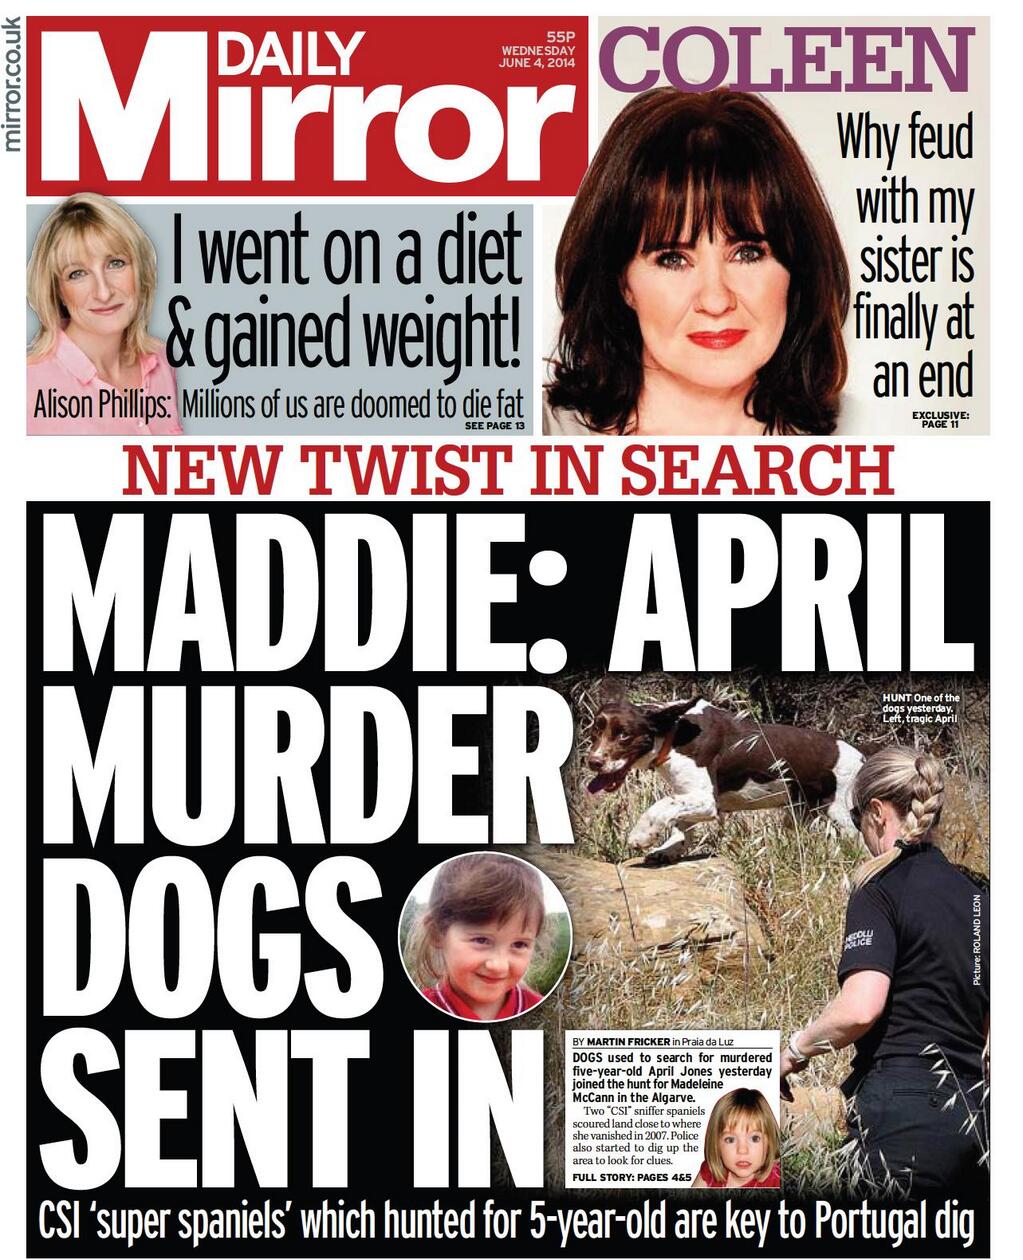 Daily Mirror, 04 June 2014